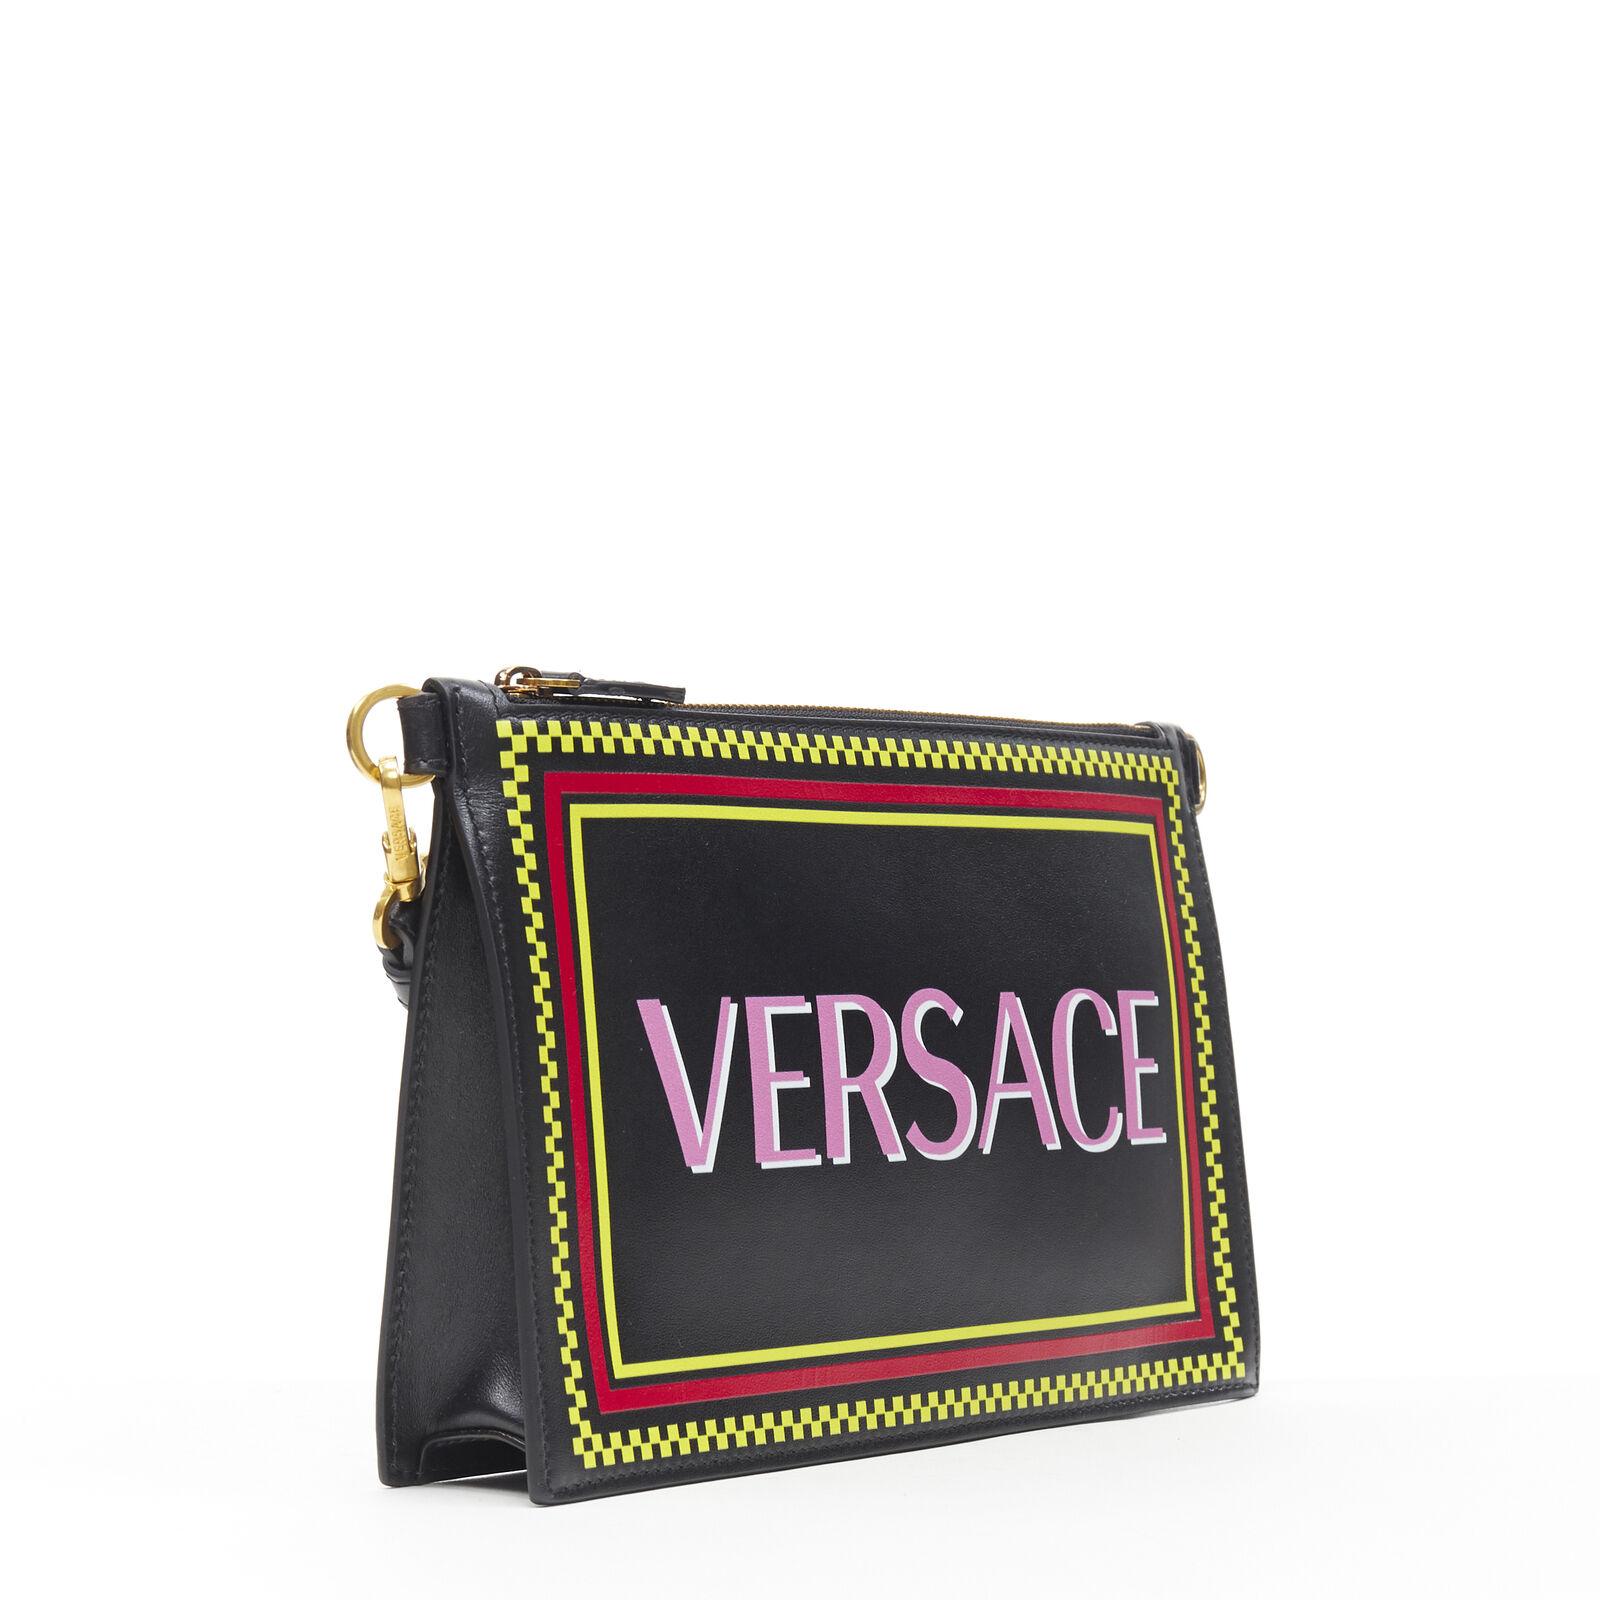 what is the versace logo